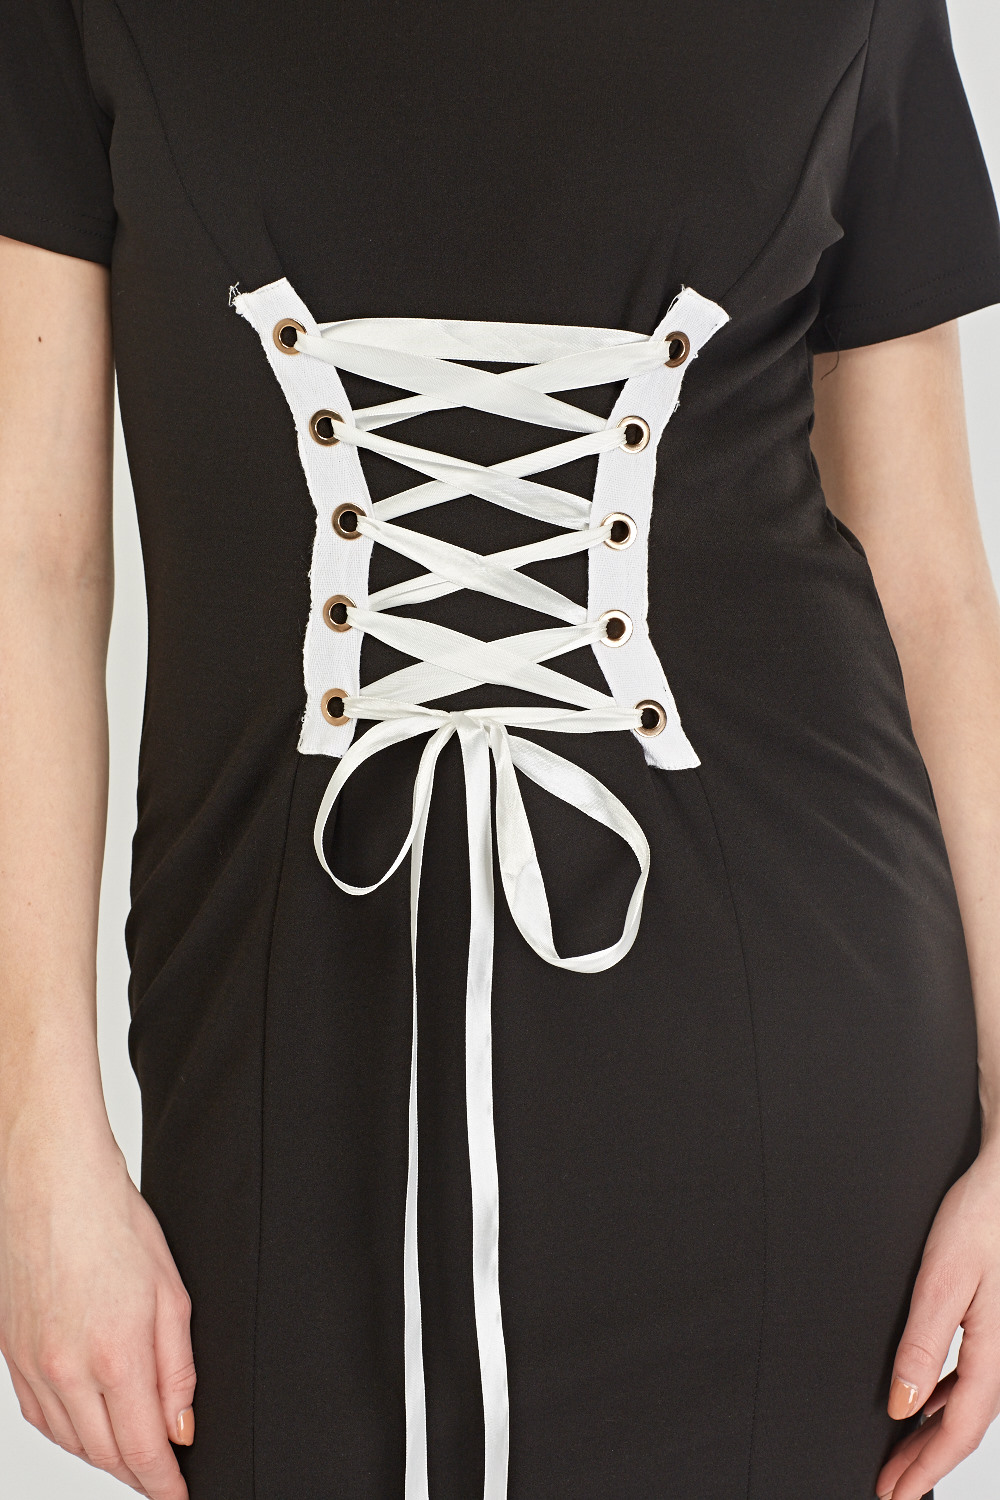 Lace Up Corset Style Dress - Just $2